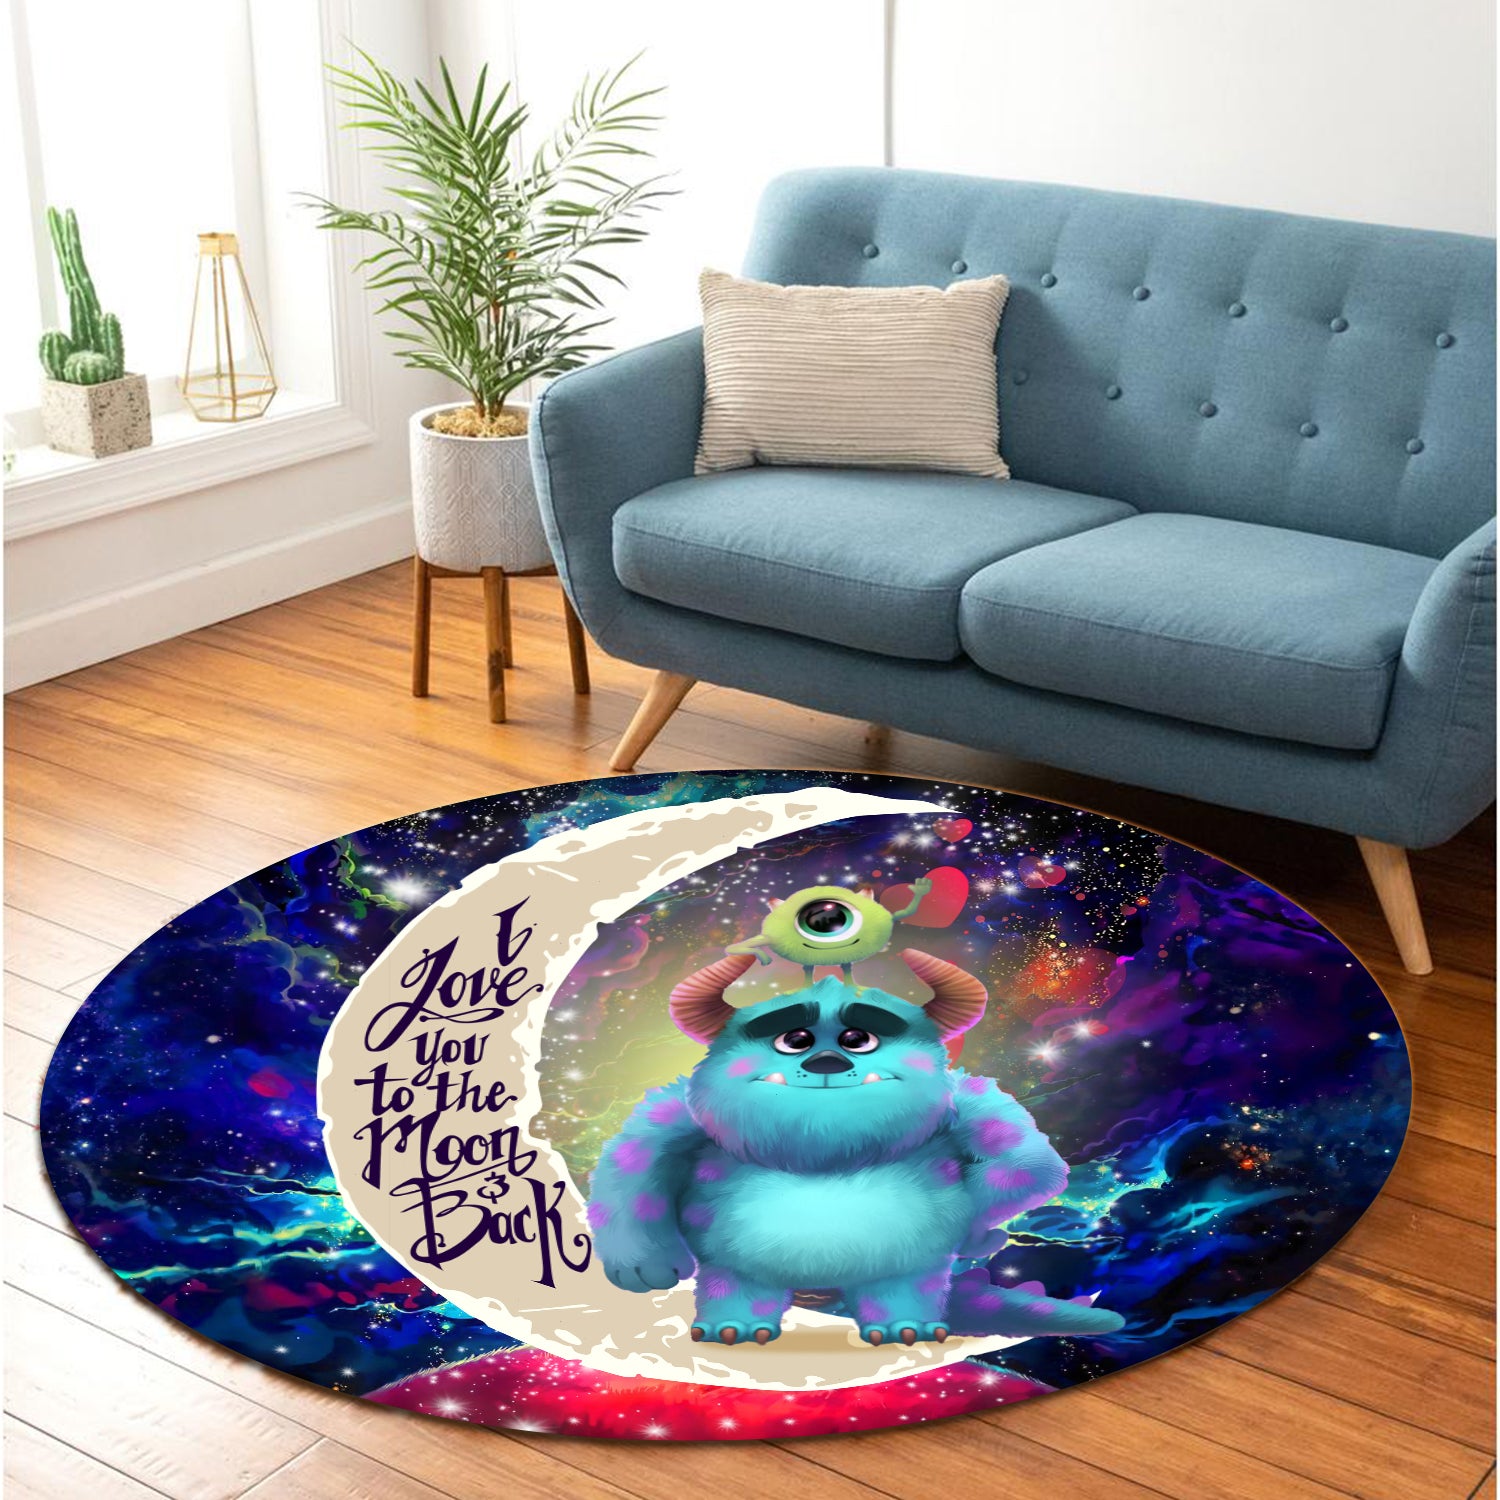 Monster Inc Sully And Mike Love You To The Moon Galaxy Round Carpet Rug Bedroom Livingroom Home Decor Nearkii